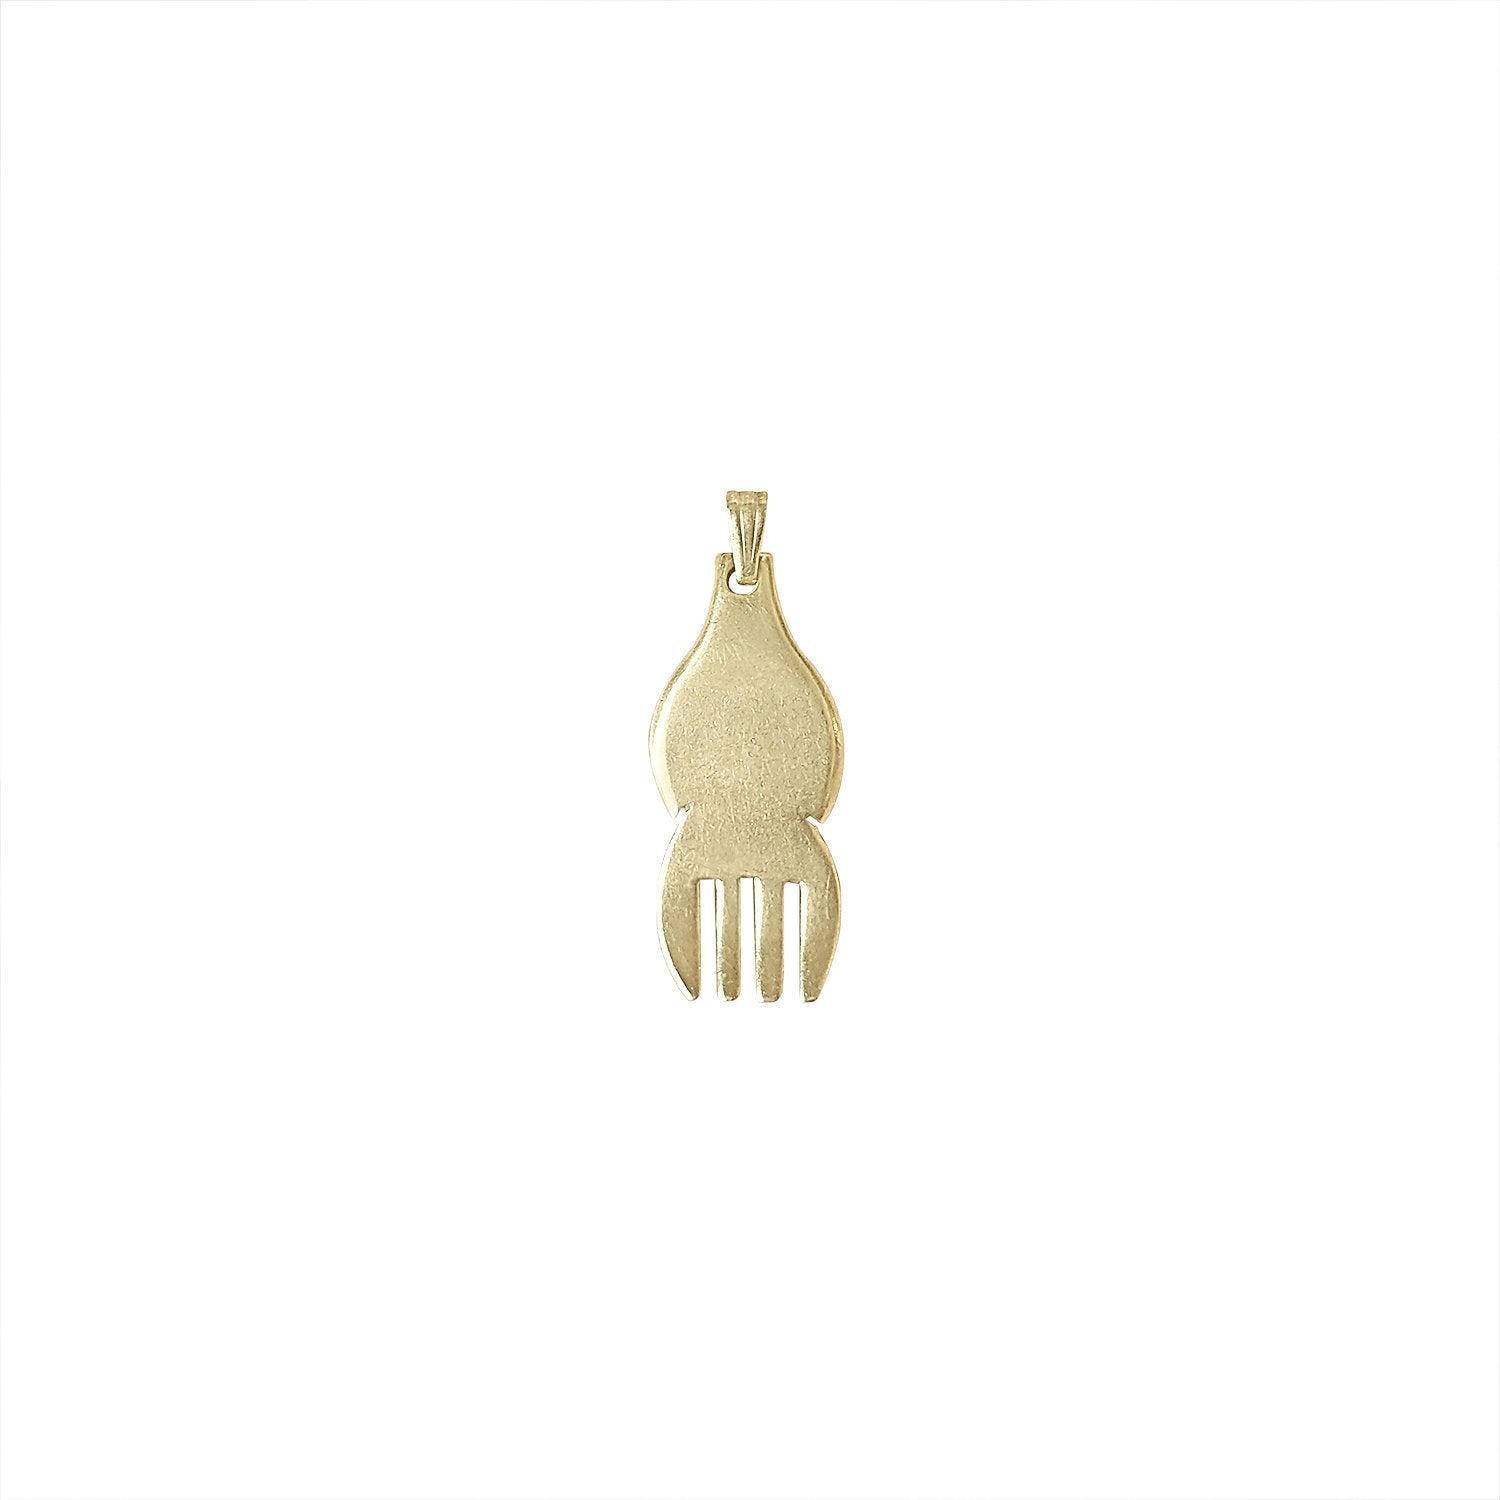 Vintage Afro Pick Charm by Fewer Finer